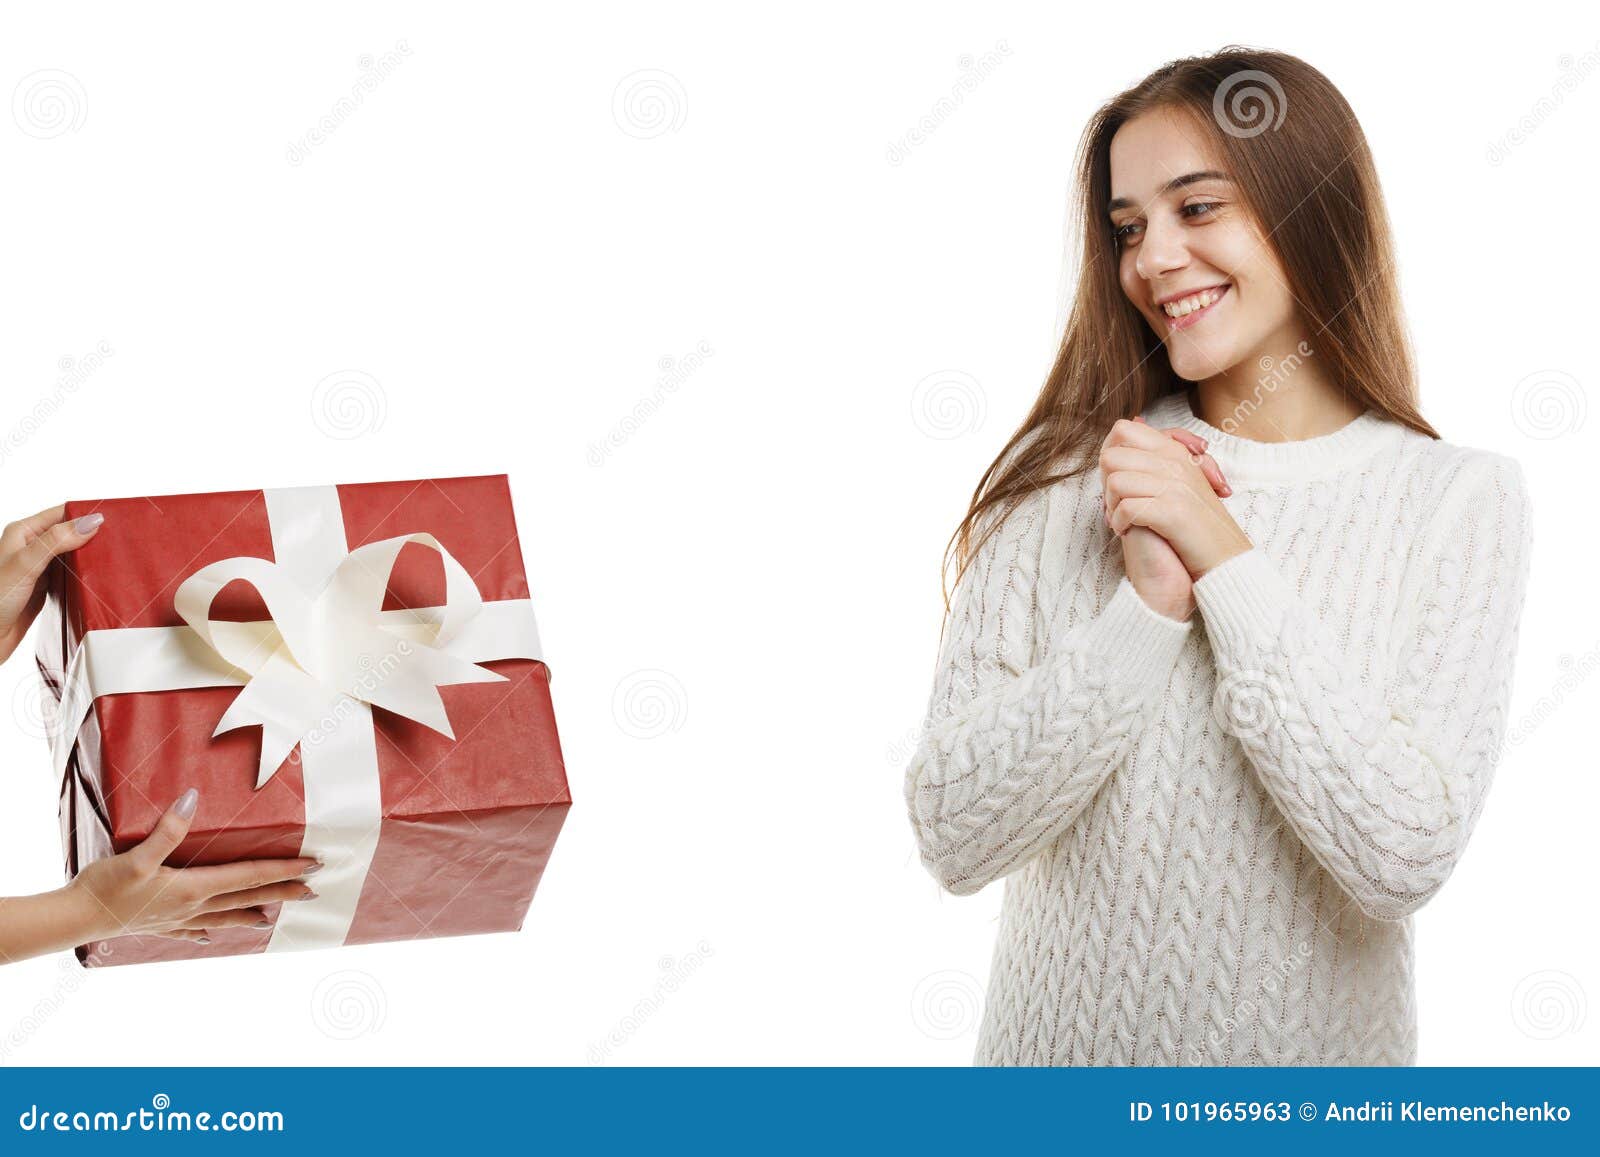 Wow Gift Girl Reaction Stock Images - Download 99 Royalty Free Photos